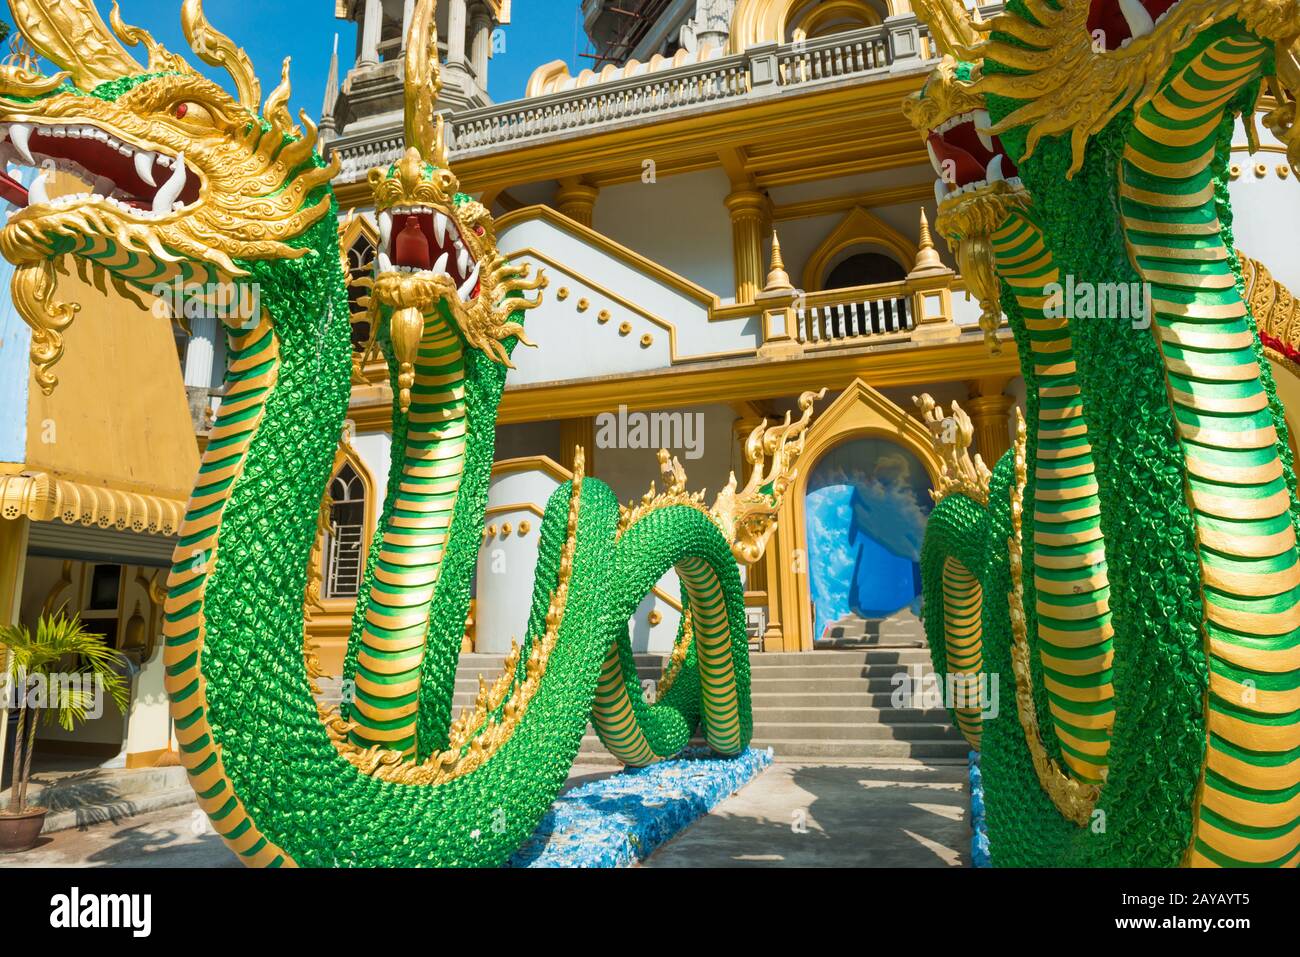 Statues of green dragons at temple in Thailand Stock Photo